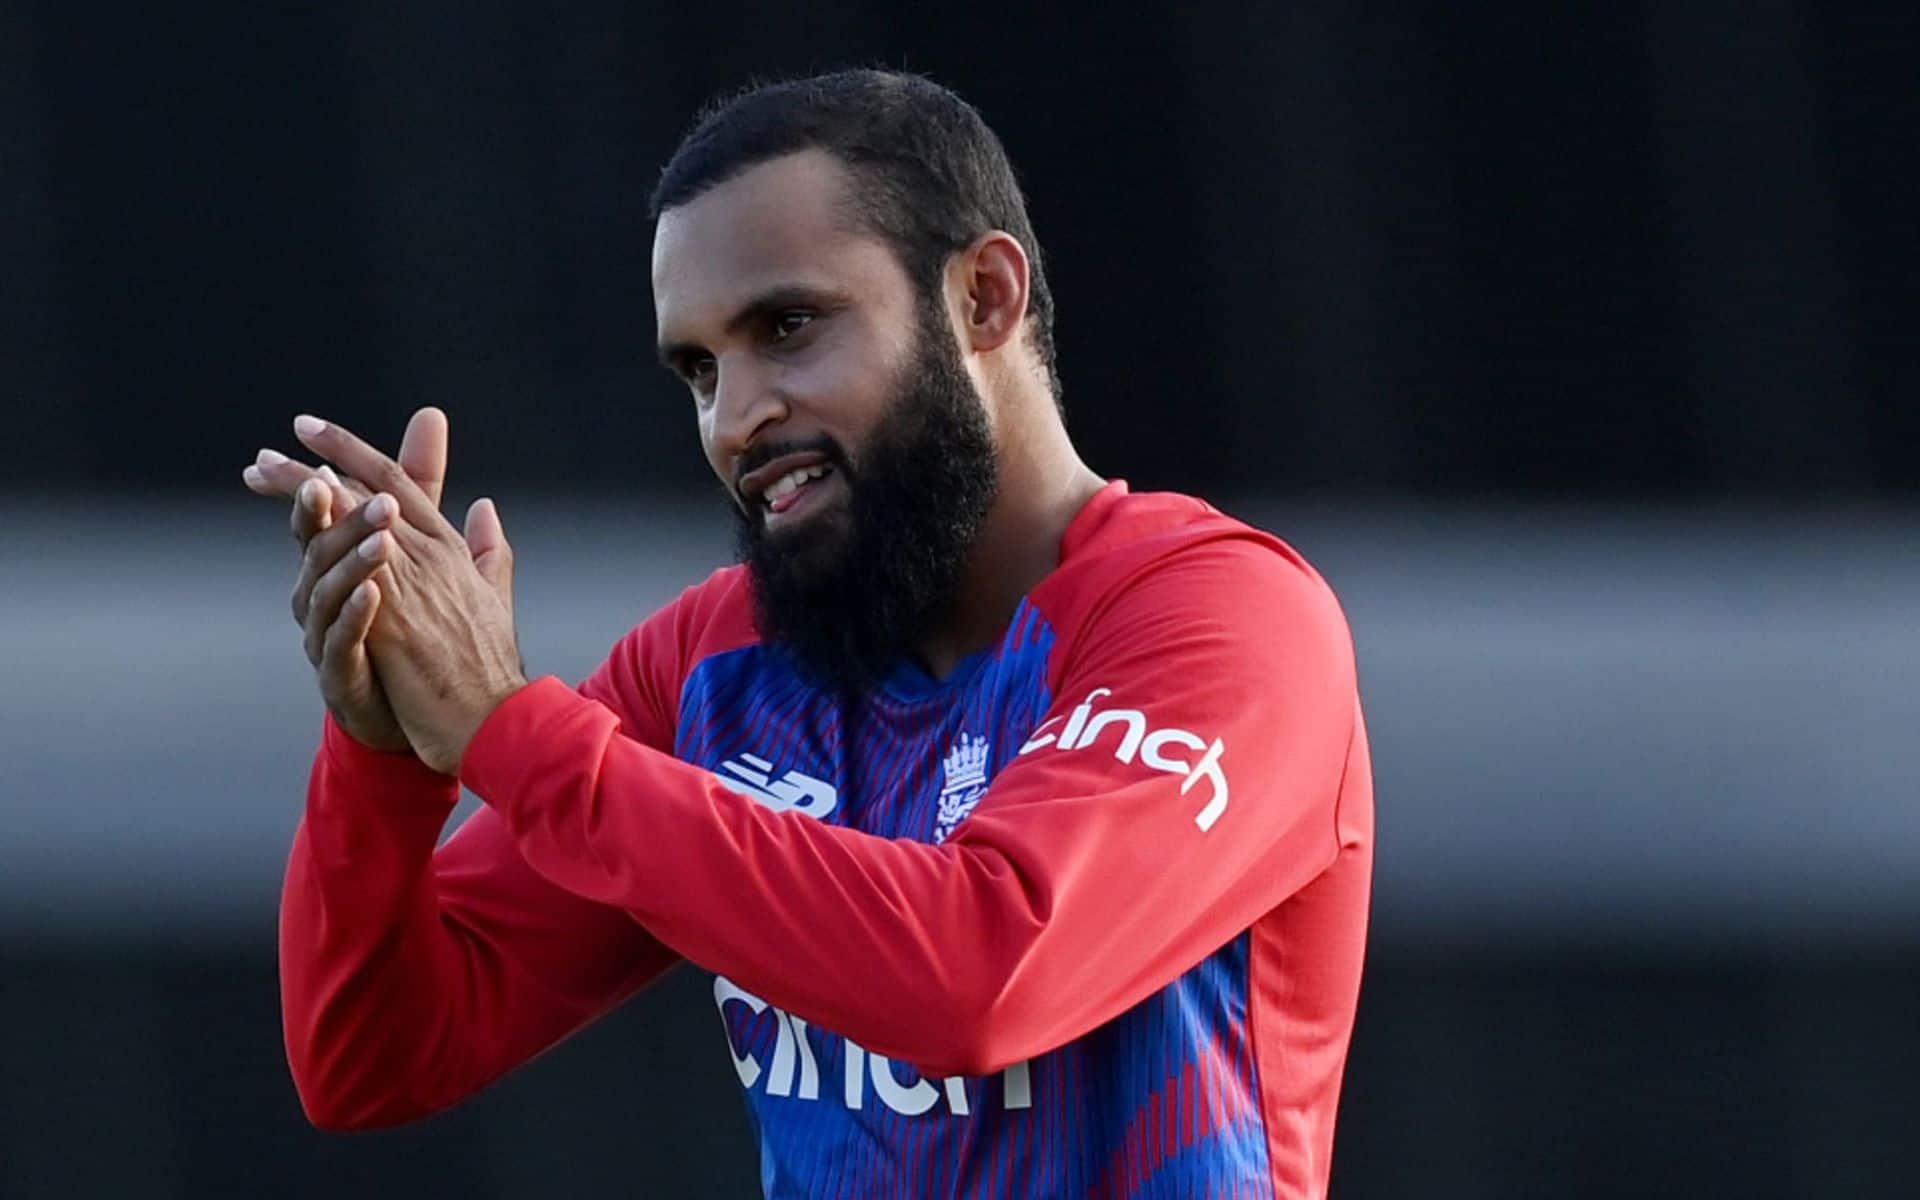 Adil Rashid is the top bowler in the world of cricket as per ICC Rankings [X.com]